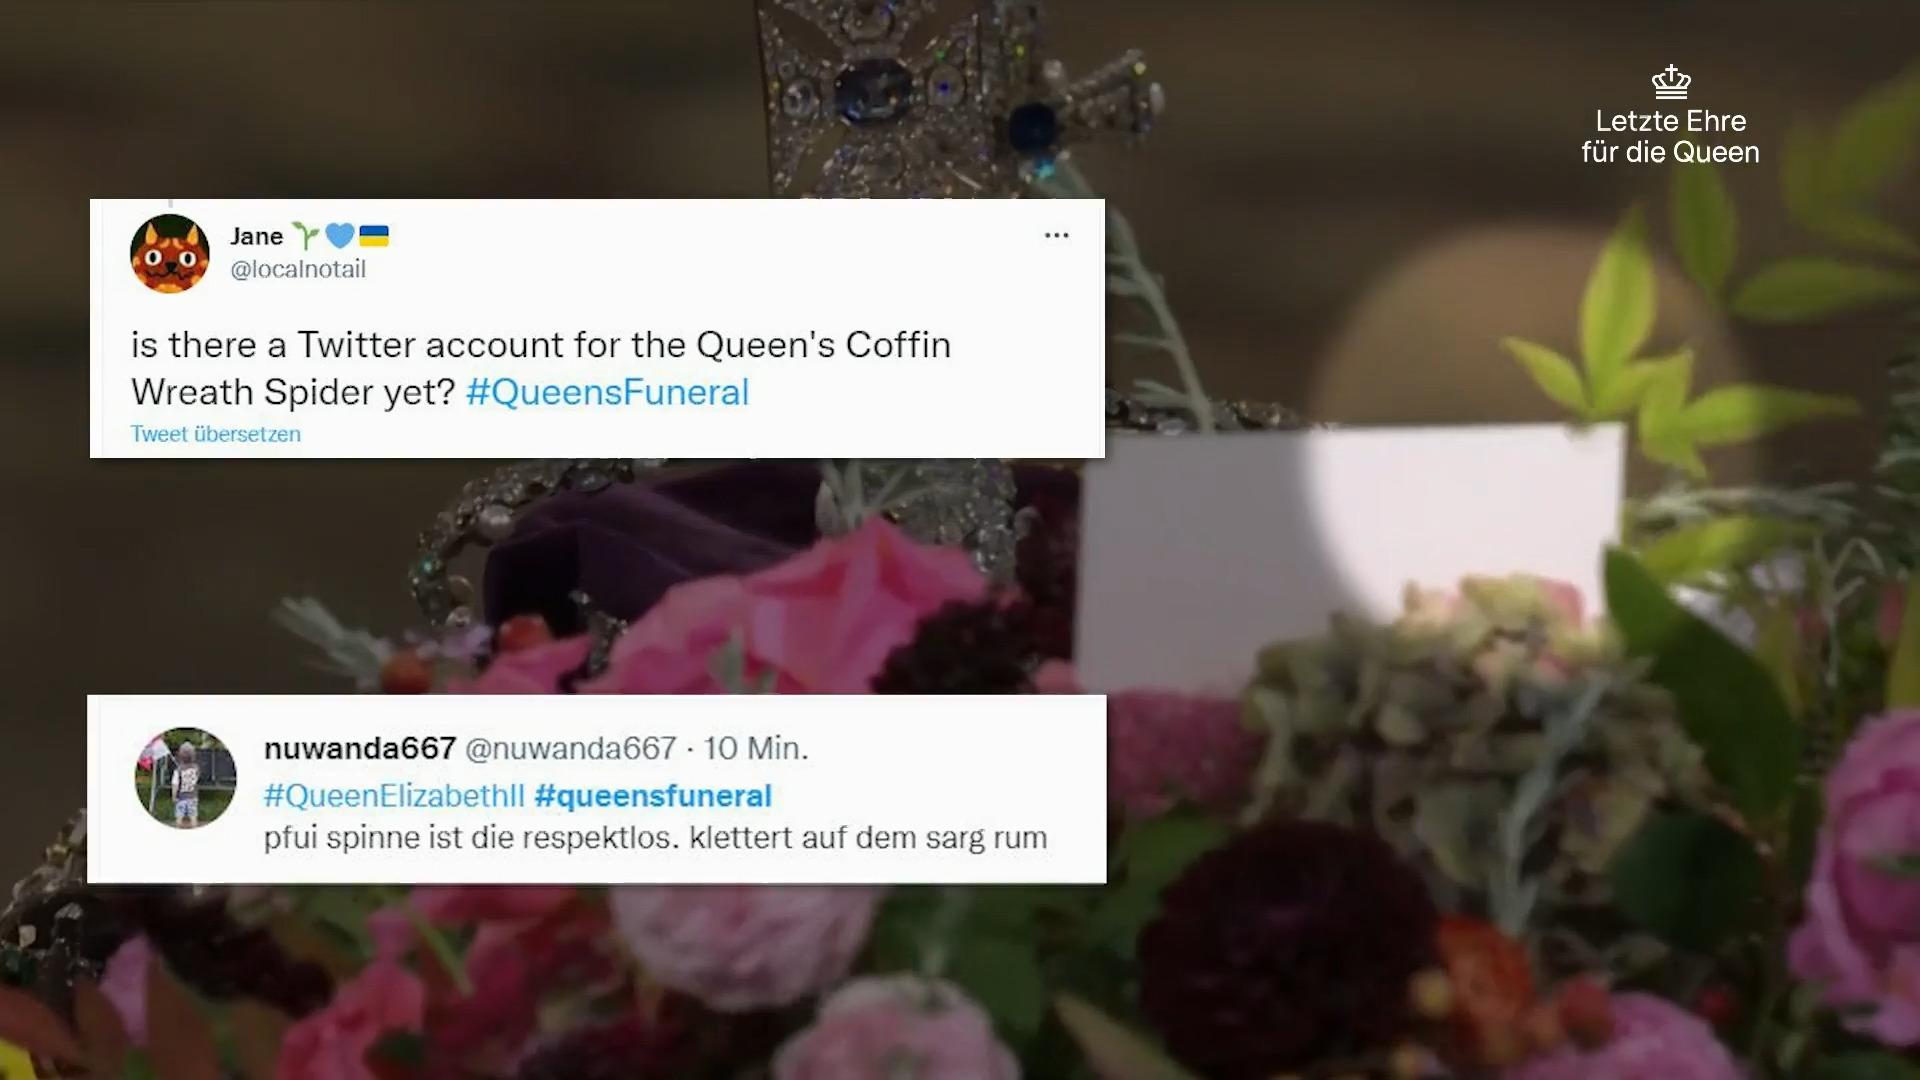 Uninvited: Green spider on the coffin decoration How Twitter users viewed the Queen's funeral service